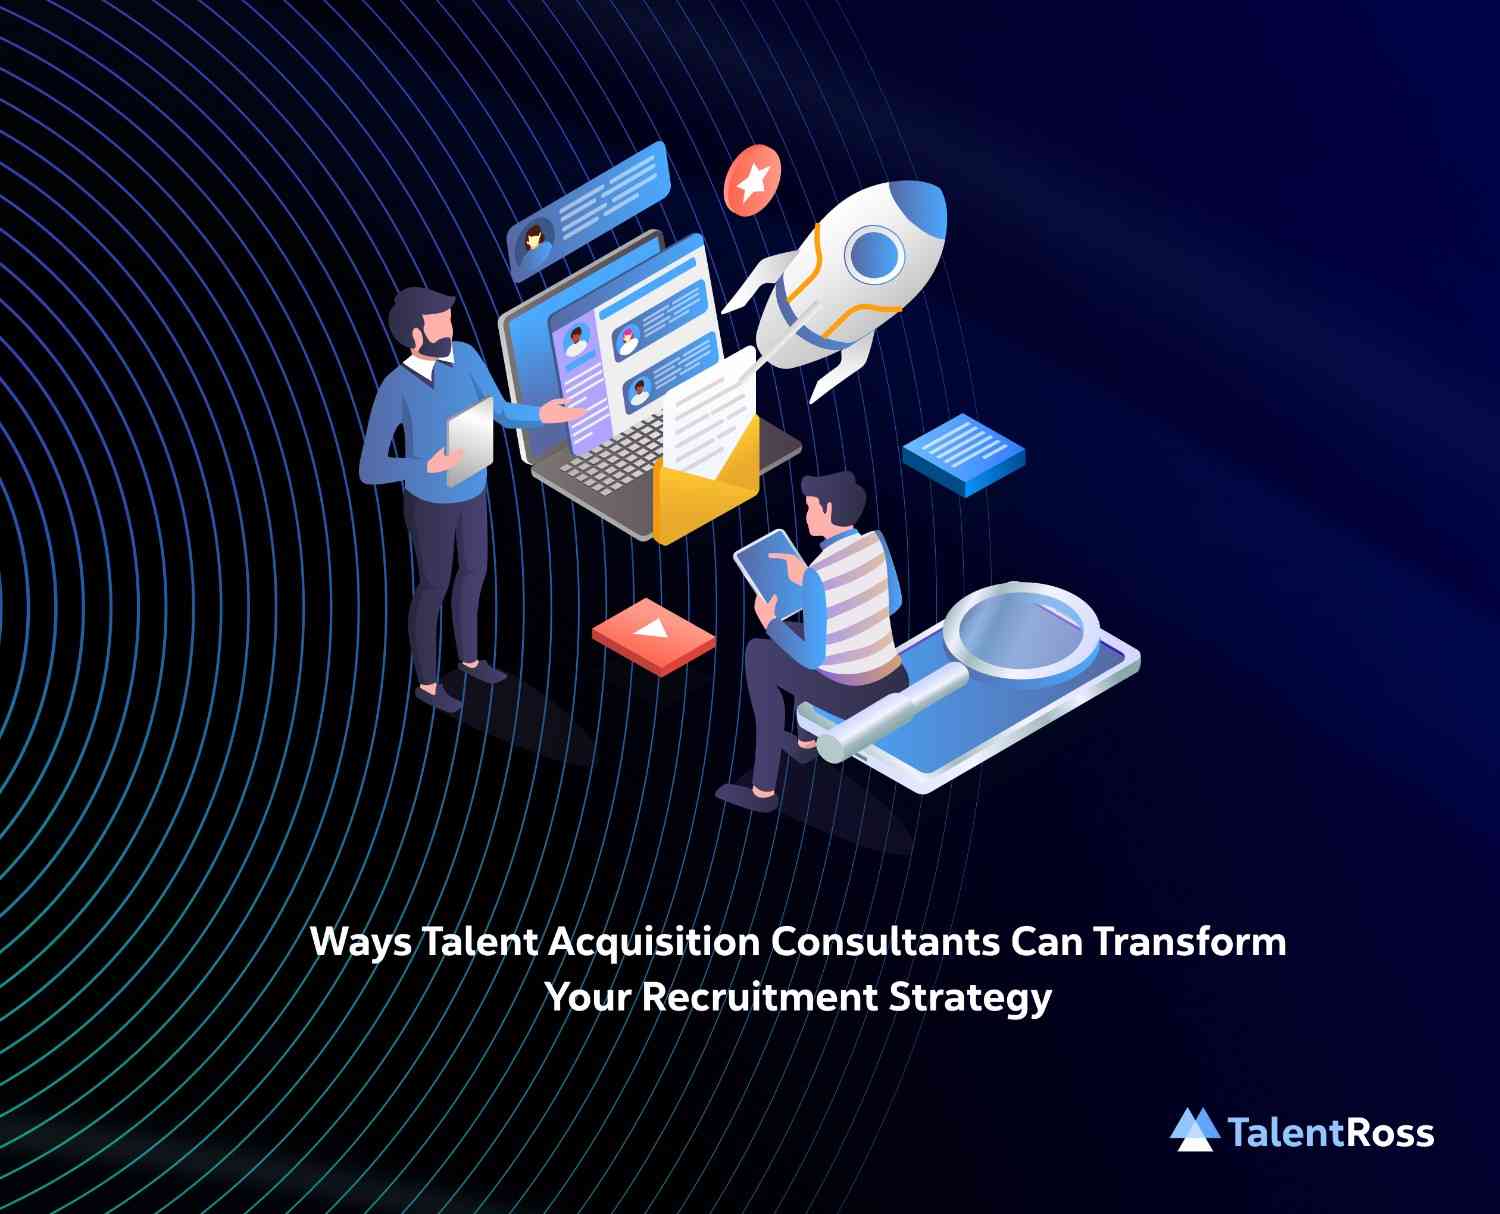 Ways Talent Acquisition Consultants Can Transform Your Recruitment Strategy